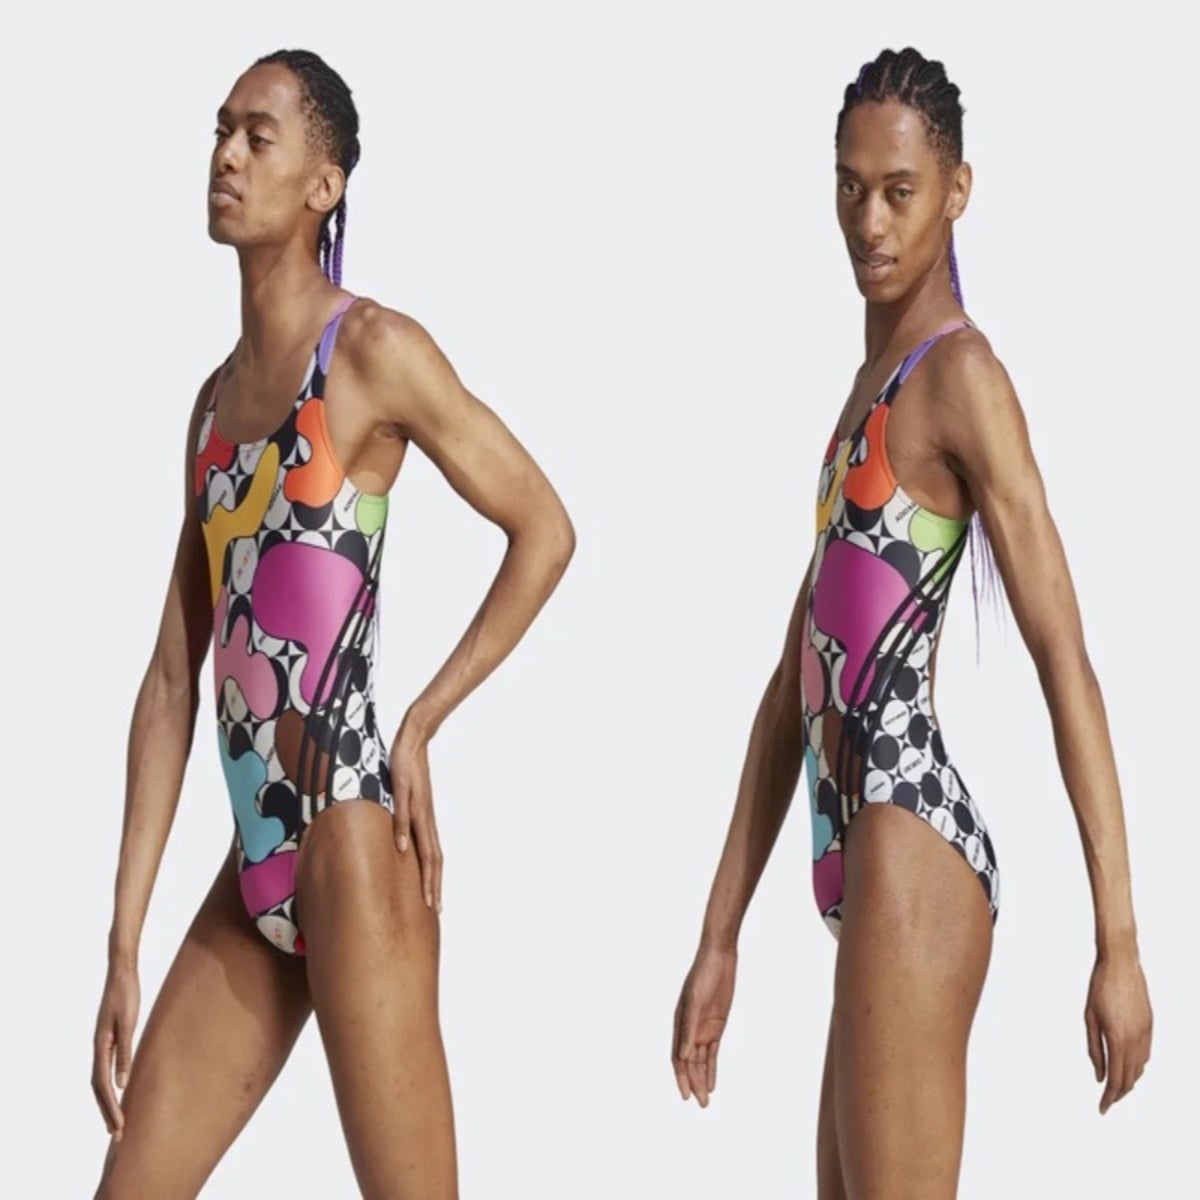 Adidas Swimsuit Model Ad Controversy Explained: Pride Campaign Details